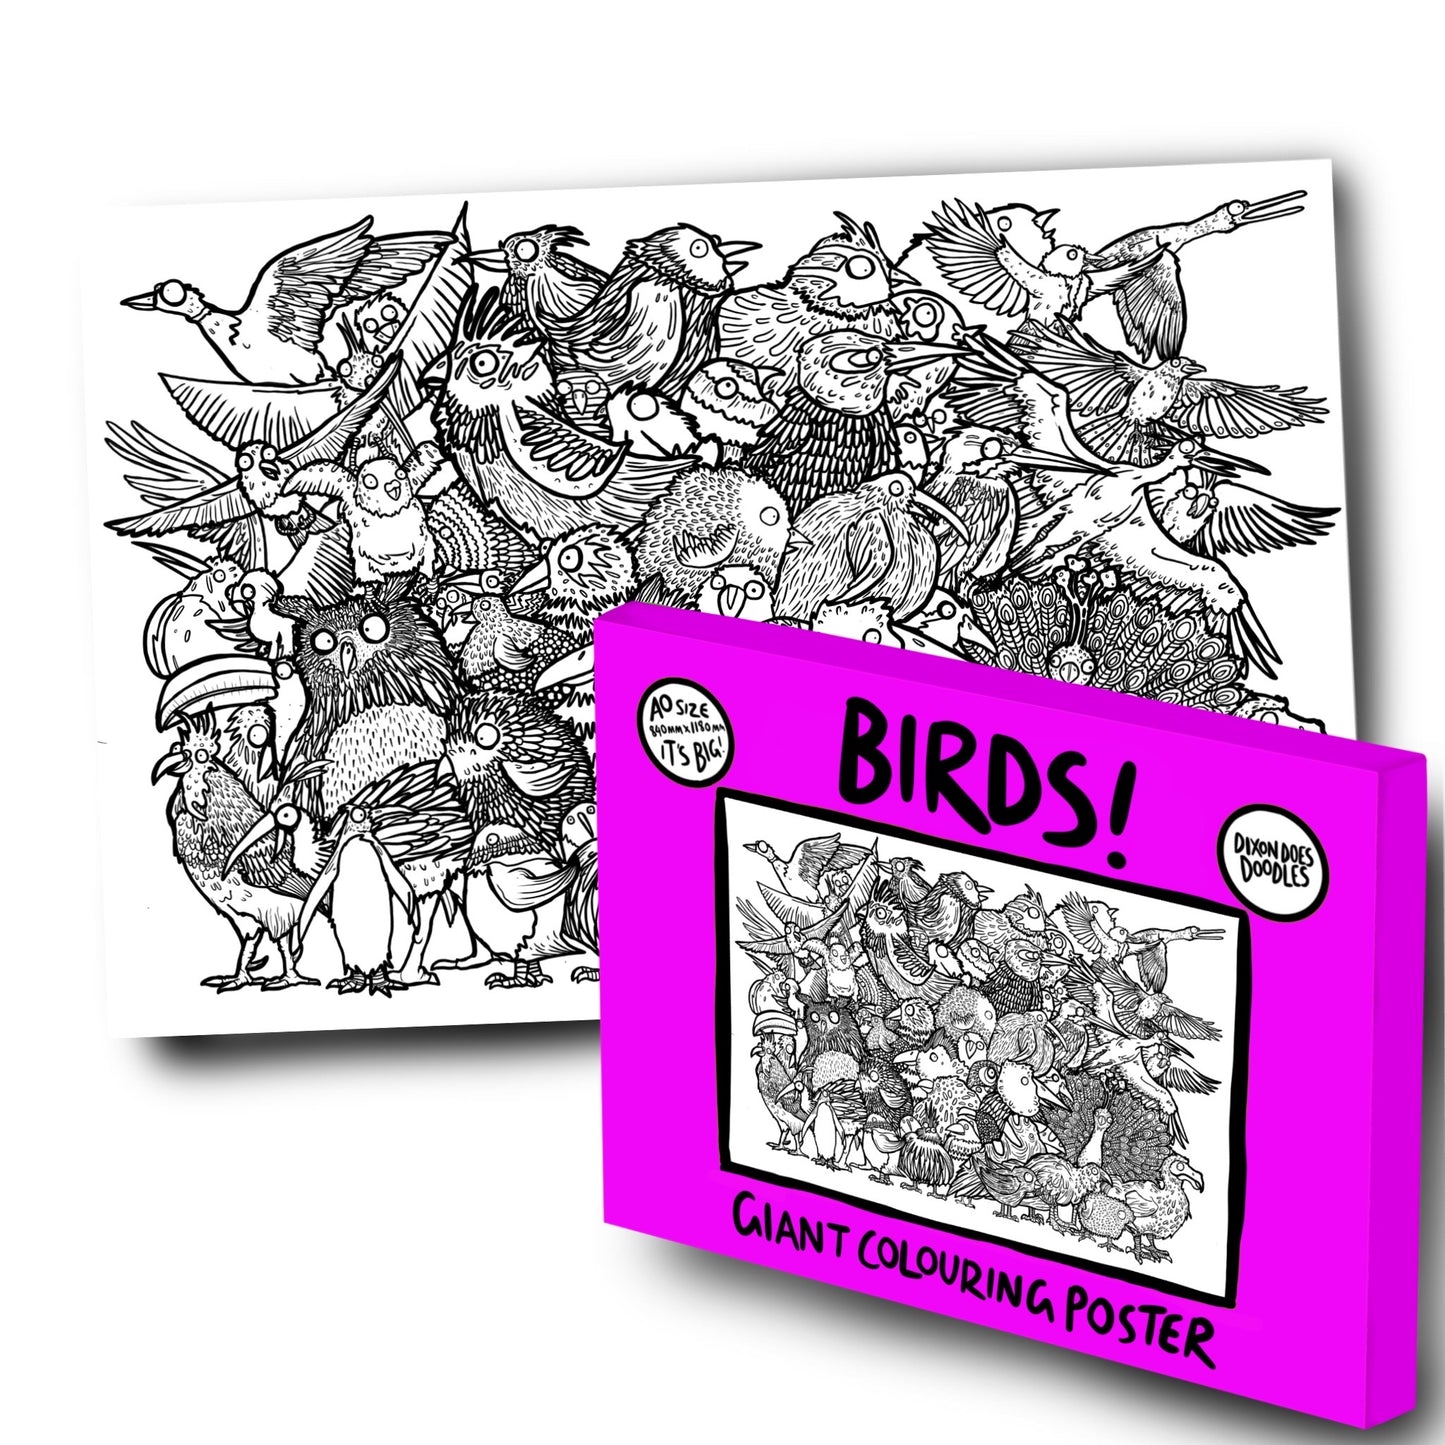 Birds! Giant Colouring Poster. Free Uk Postage